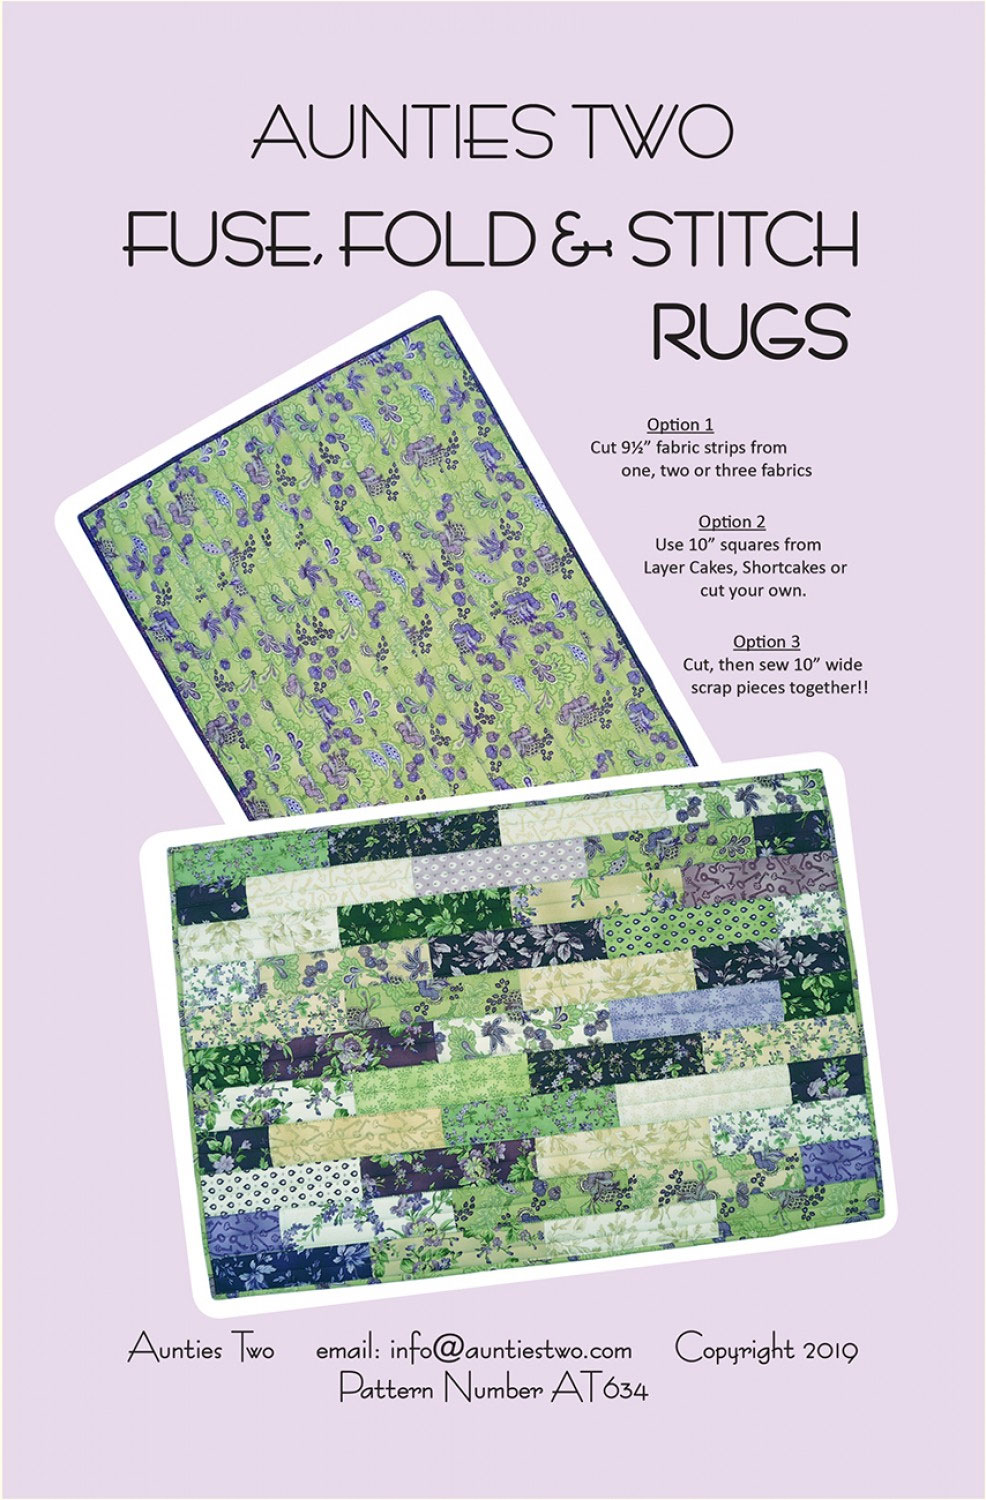 fuse-fold-stitch-rugs-sewing-pattern-Aunties-Two-front